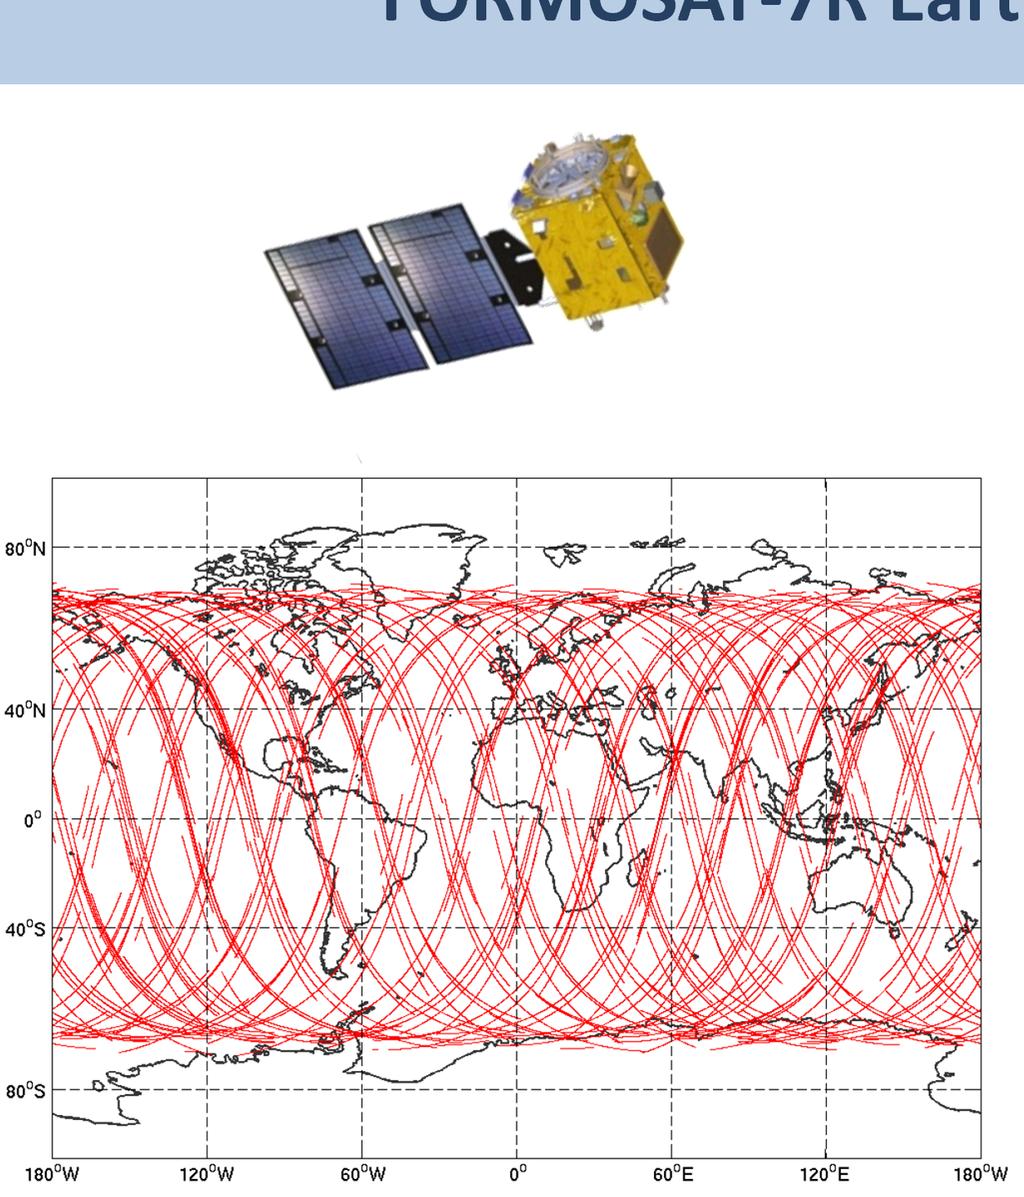 FORMOSAT 7R Earth coverage 1 day Global coverage The satellite FORMOSAT 7 Reflectometry, as